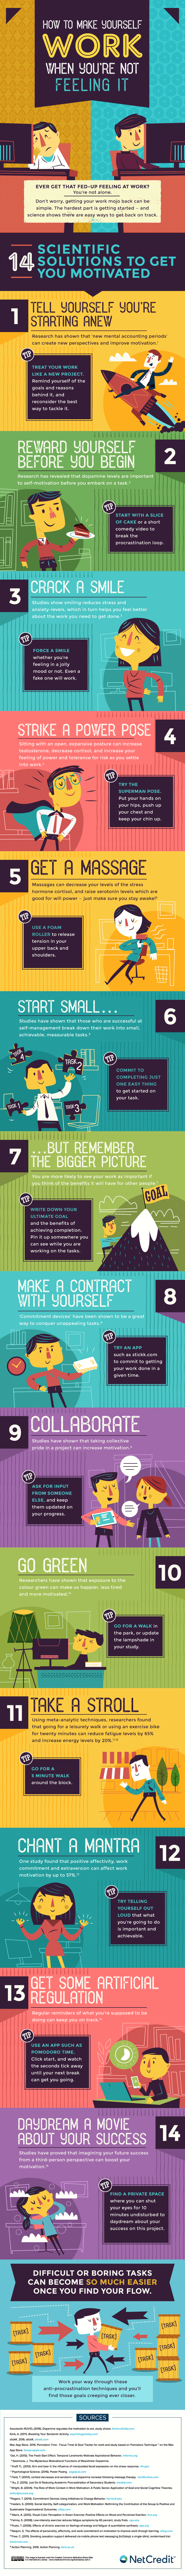 How to Make Yourself Work When You’re Not Feeling It - #infographic